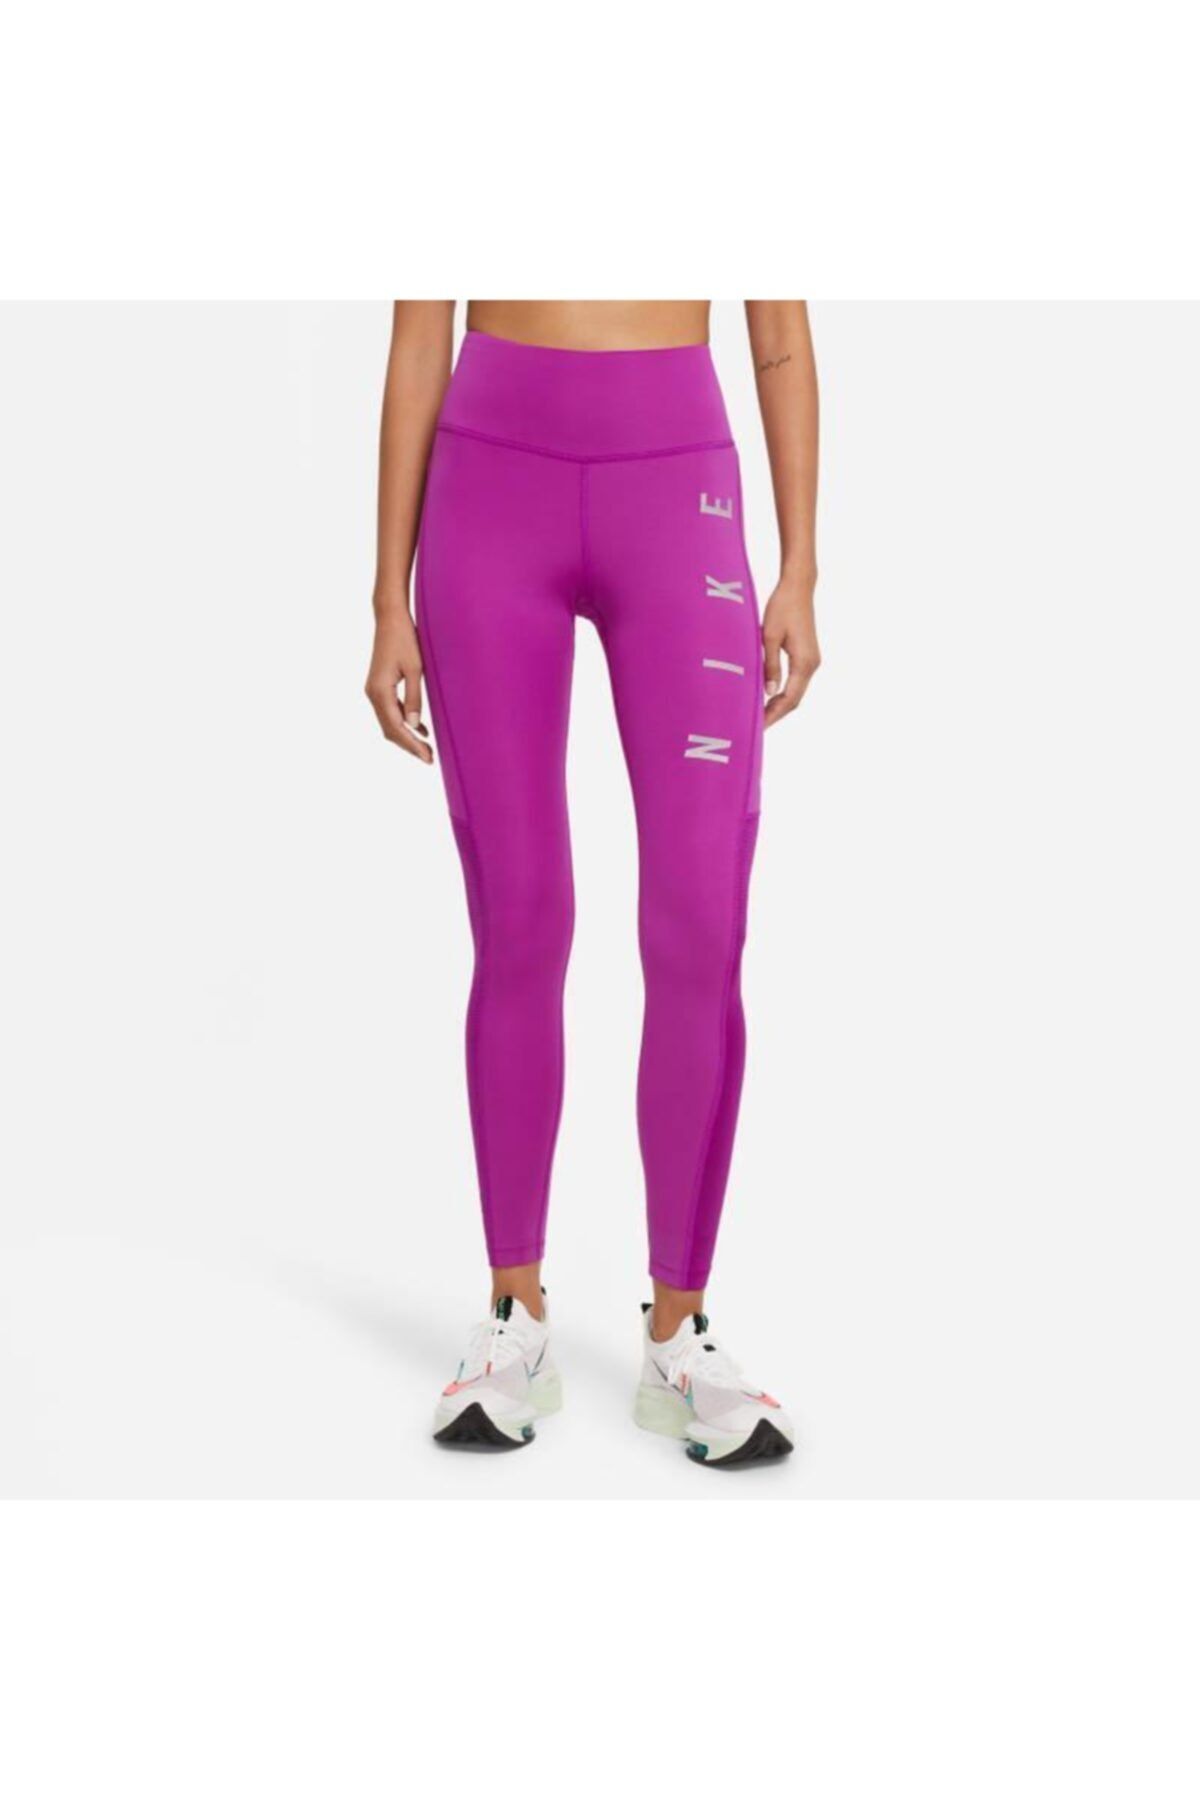 Nike Epic Fast Run Division Women's Tights - Pink Cz9592-584